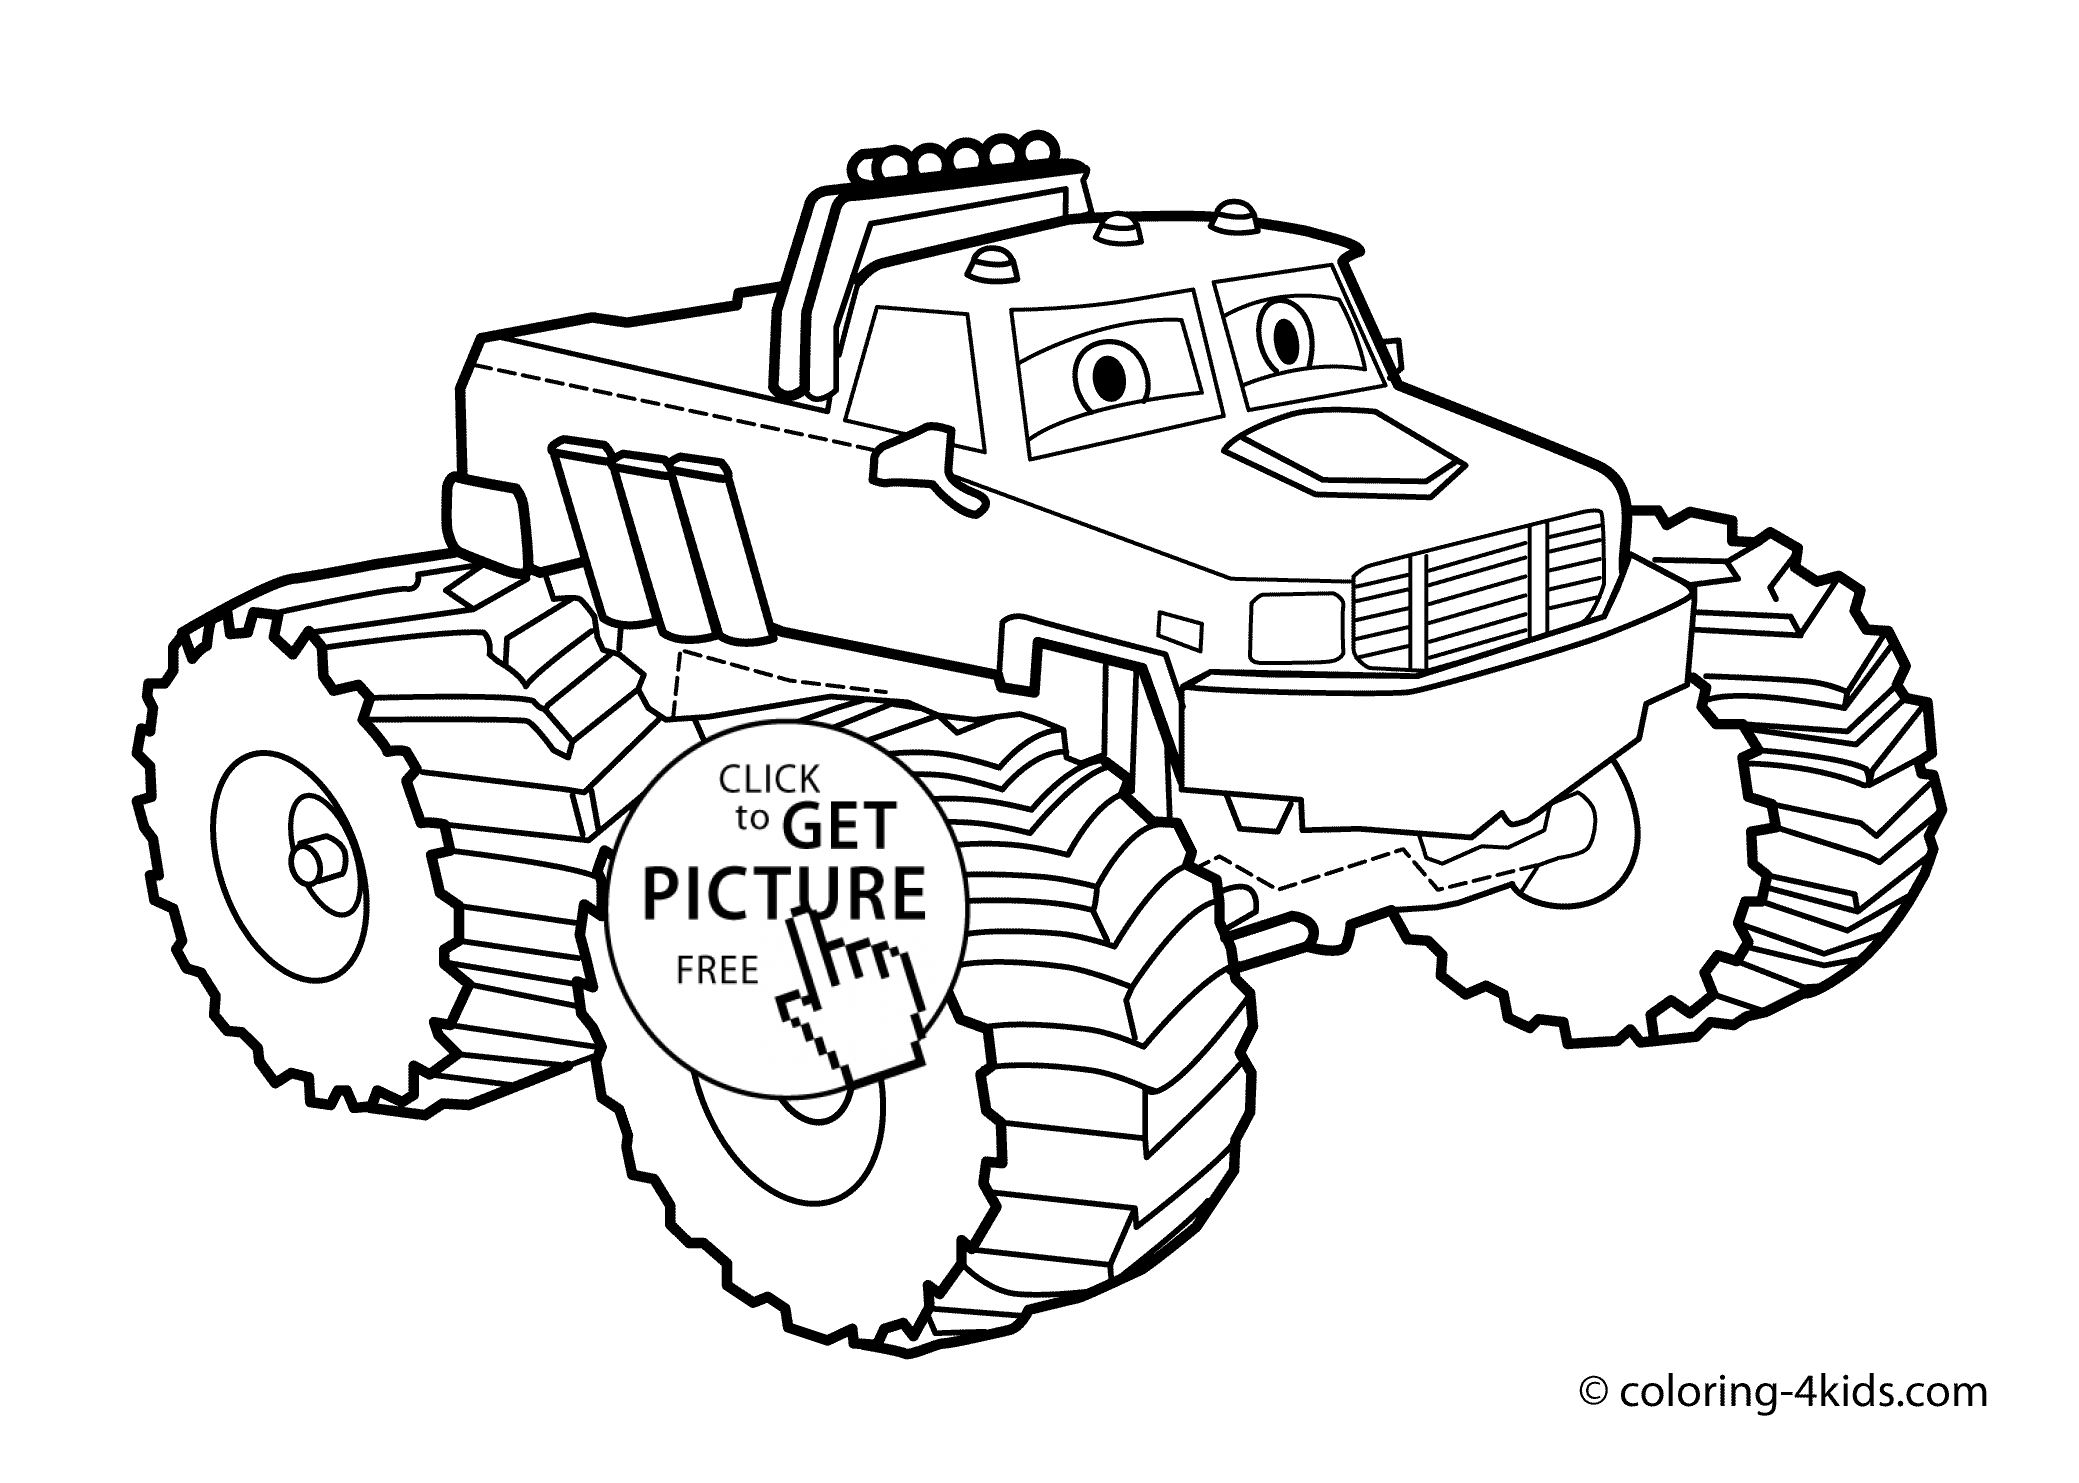 Big Truck Coloring Pages Monster Truck Coloring Page For Kids Monster Truck Coloring Books